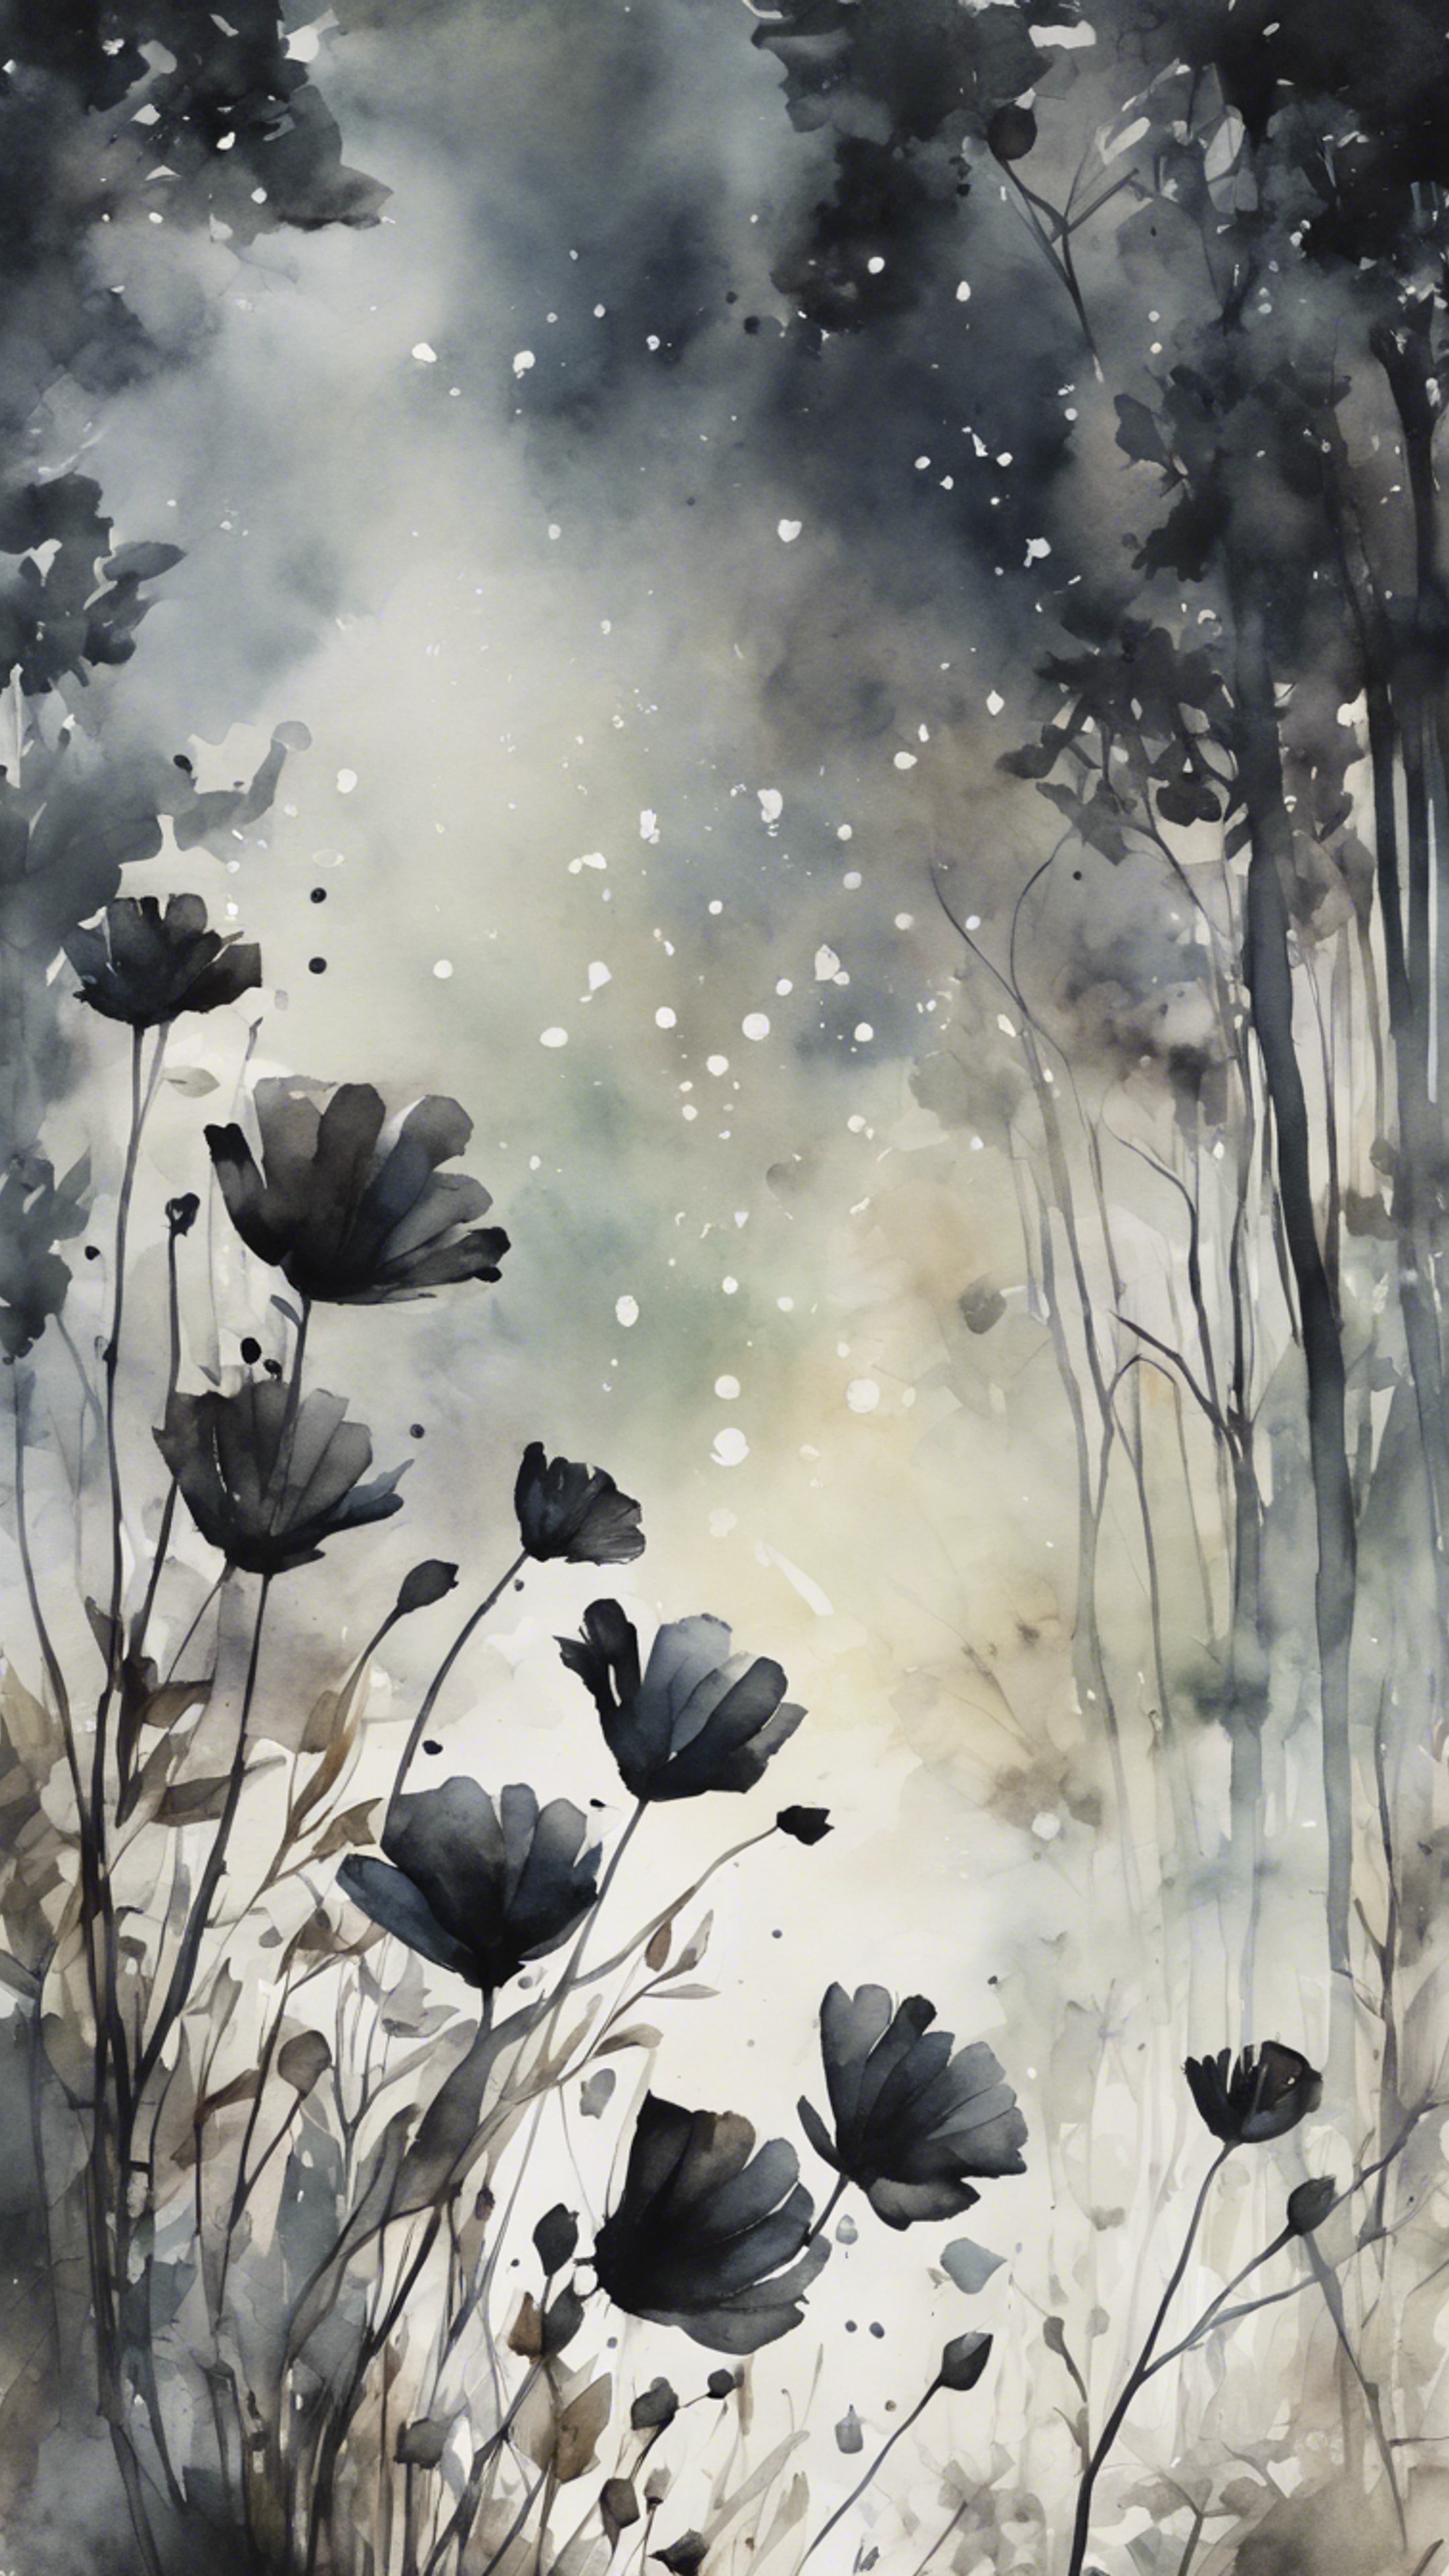 A dreamy watercolor painting depicting black flowers blooming in the heart of a dense forest. ផ្ទាំង​រូបភាព[006f57e6dd8144ebb2db]